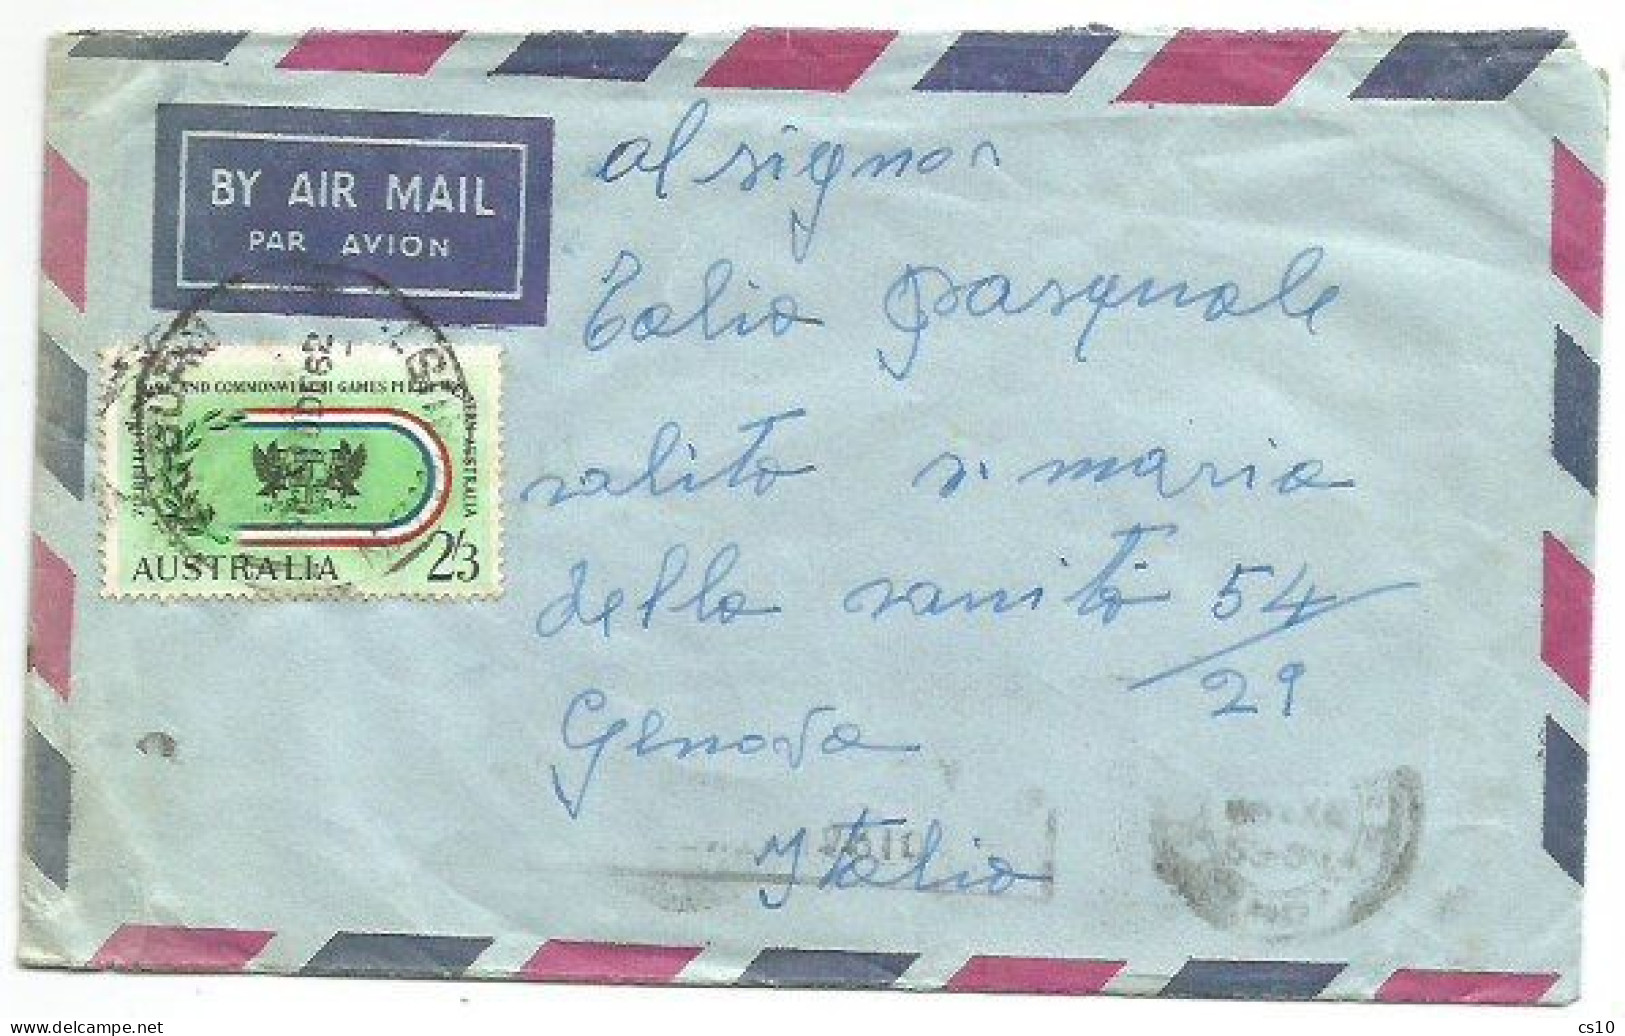 Australia Commonwealth Games 2S3 Solo Franking Airmail Cover Sidney 10dec1962 X Italy - Cartas & Documentos